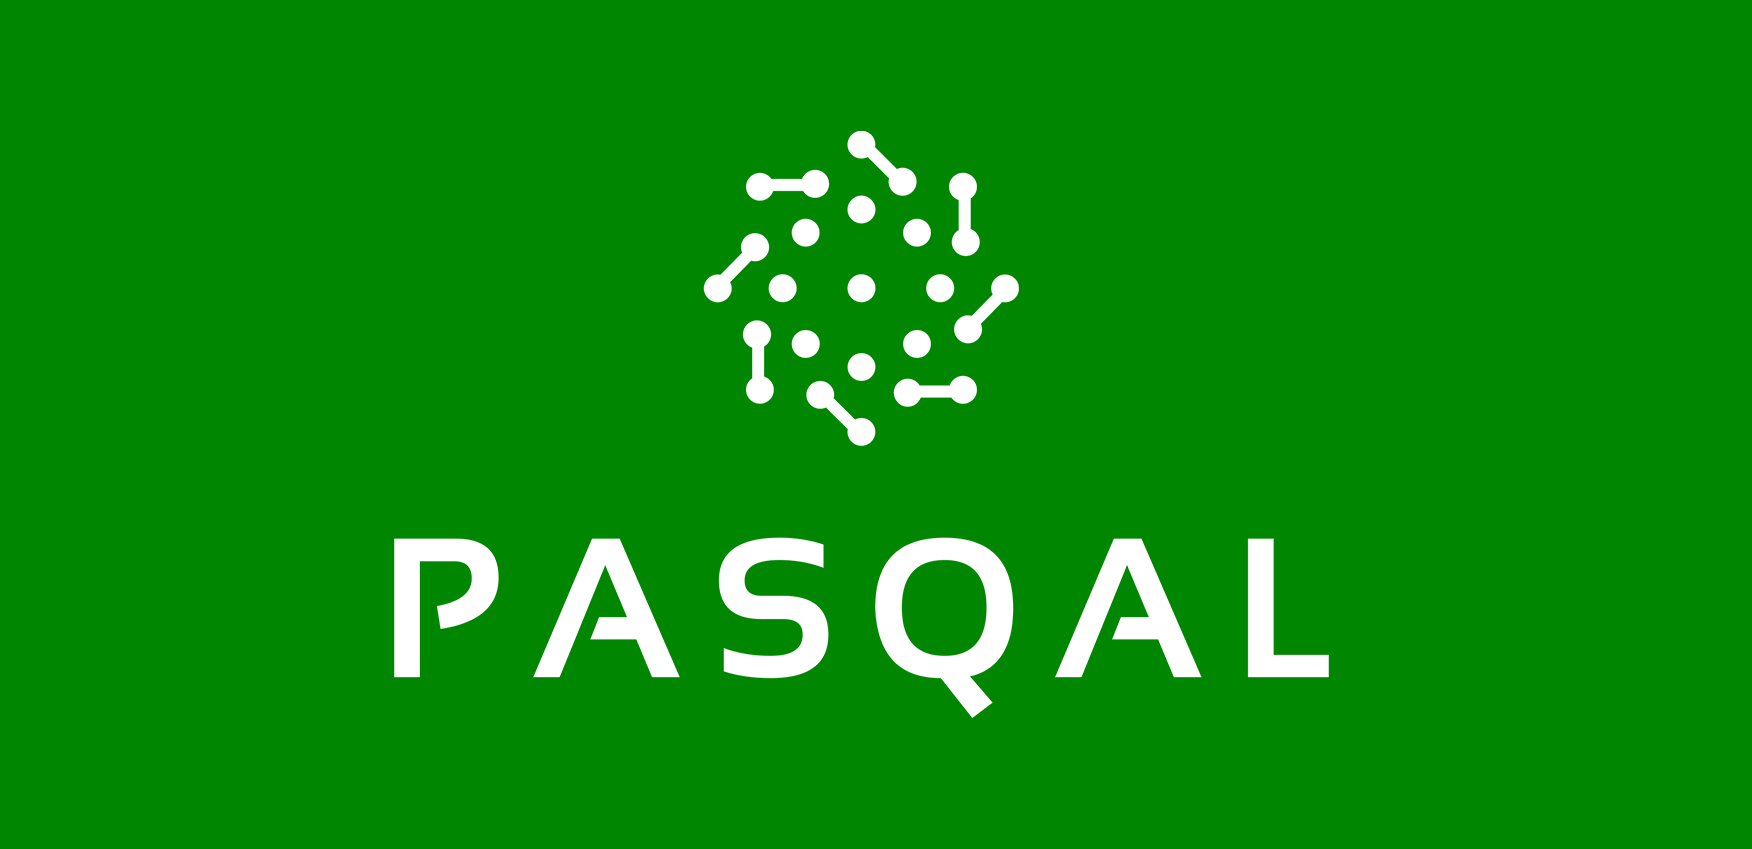 Quantum Start-Up Pasqal Has A Nobel Prize Winner On Its Founding Team.